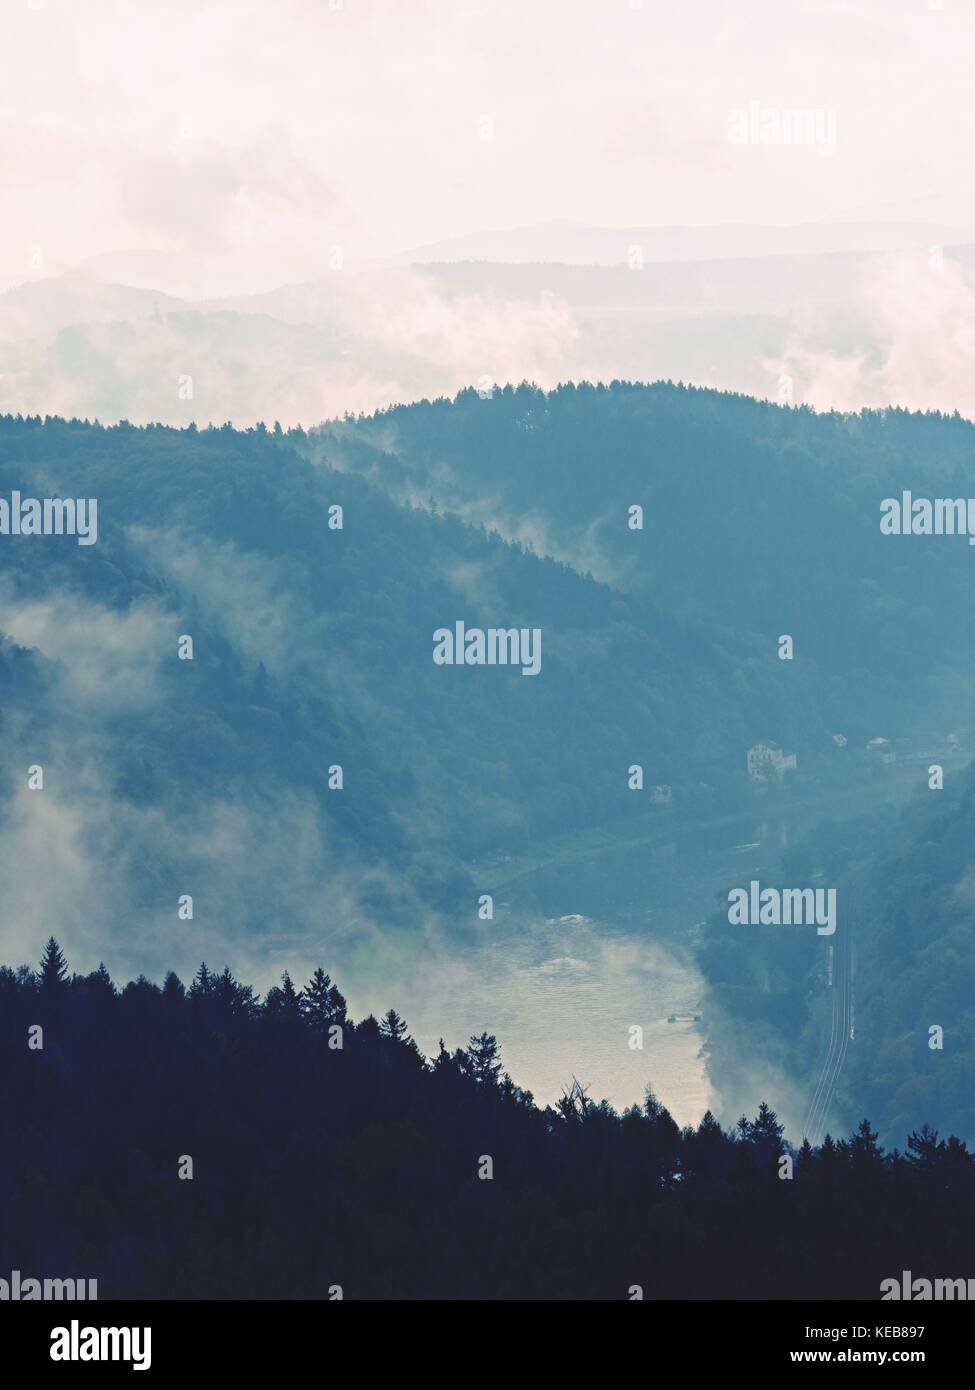 Autumn sunrise in a beautiful mountain within inversion. Peaks of hills strip out from foggy background. Stock Photo